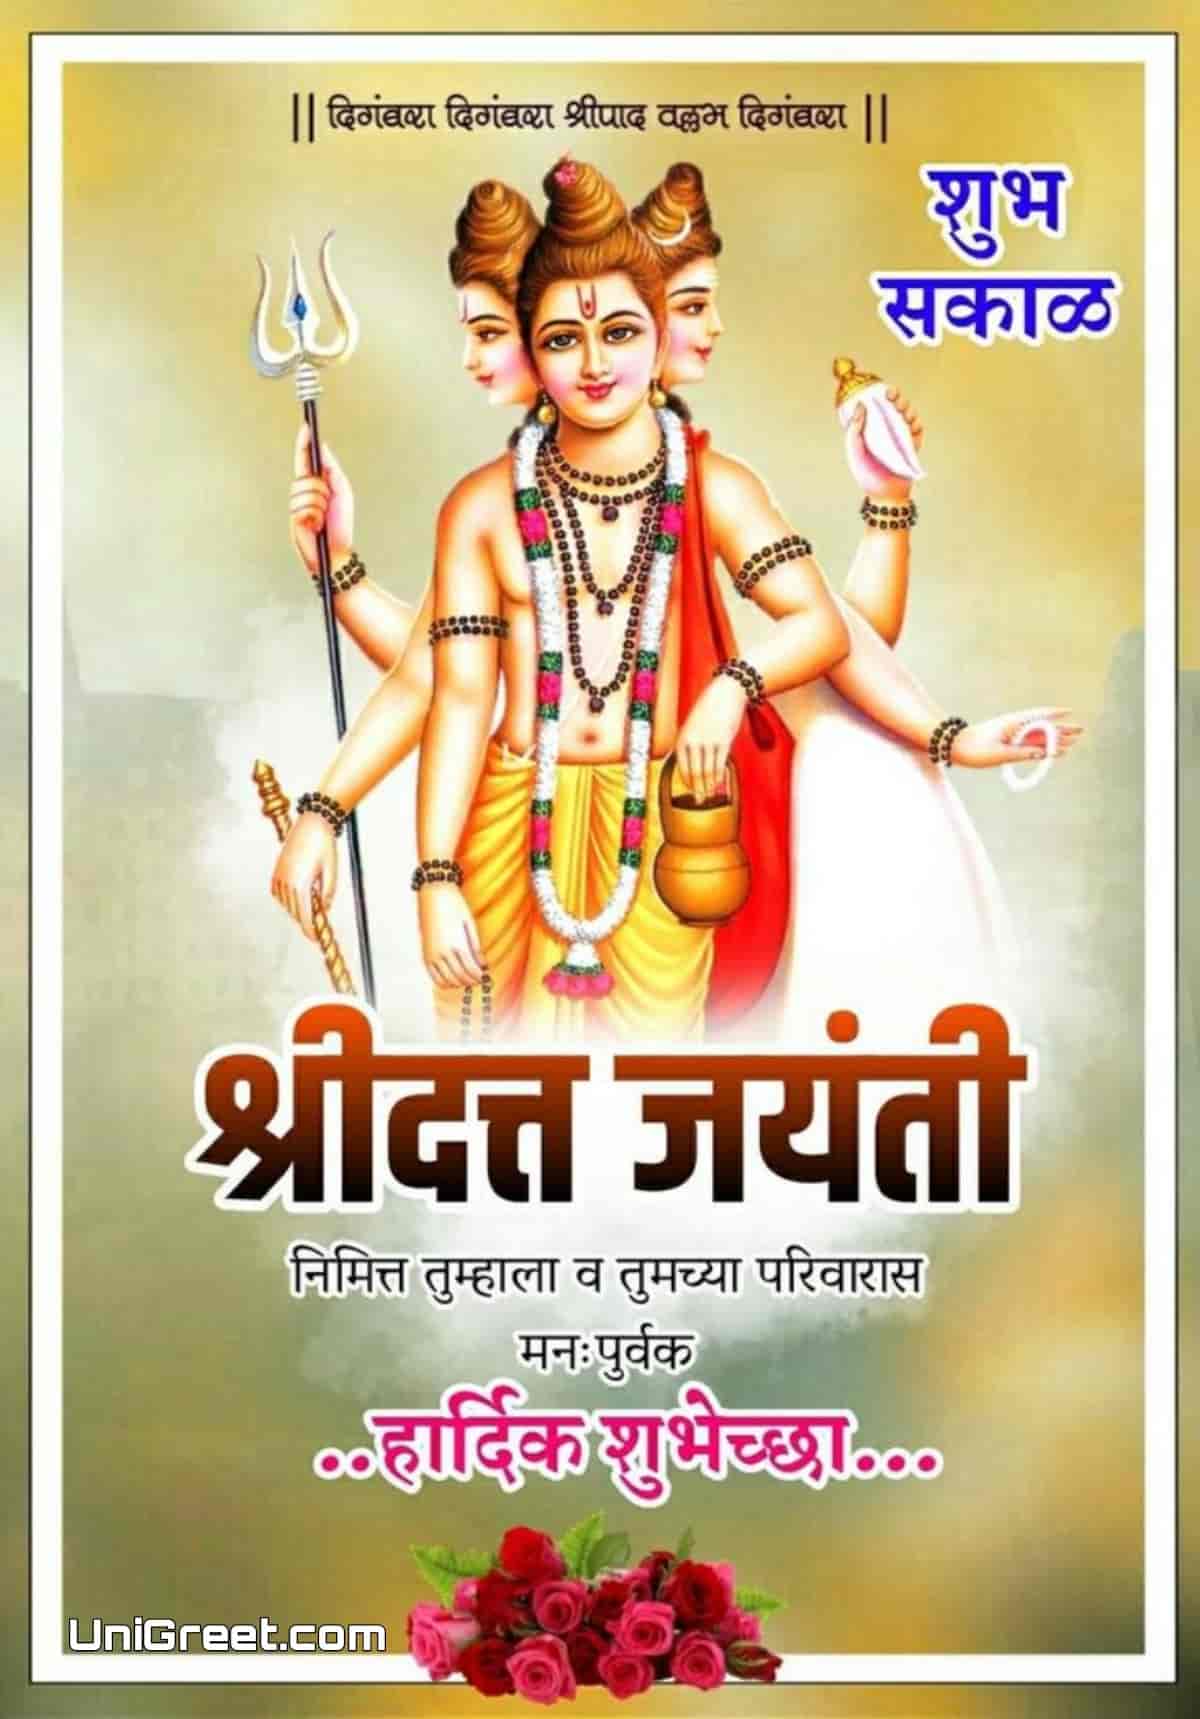 New ?? Datta Jayanti Wishes Images Quotes, Status Photo